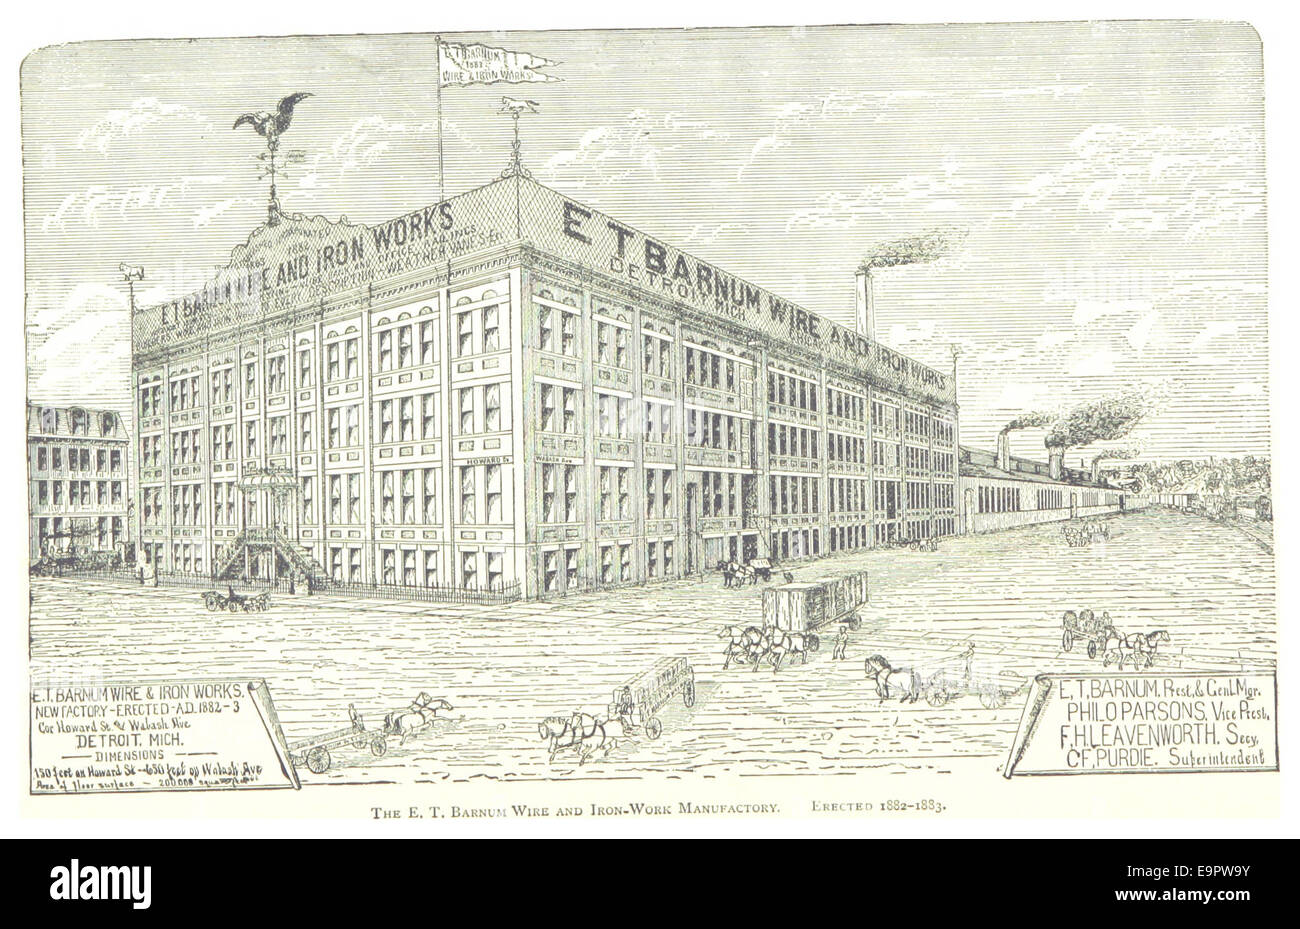 FARMER(1884) Detroit, p864 THE E.T. BARNUM WIRE AND IRON WORK MANUFACTORY. ERECTED 1882-1883 Stock Photo